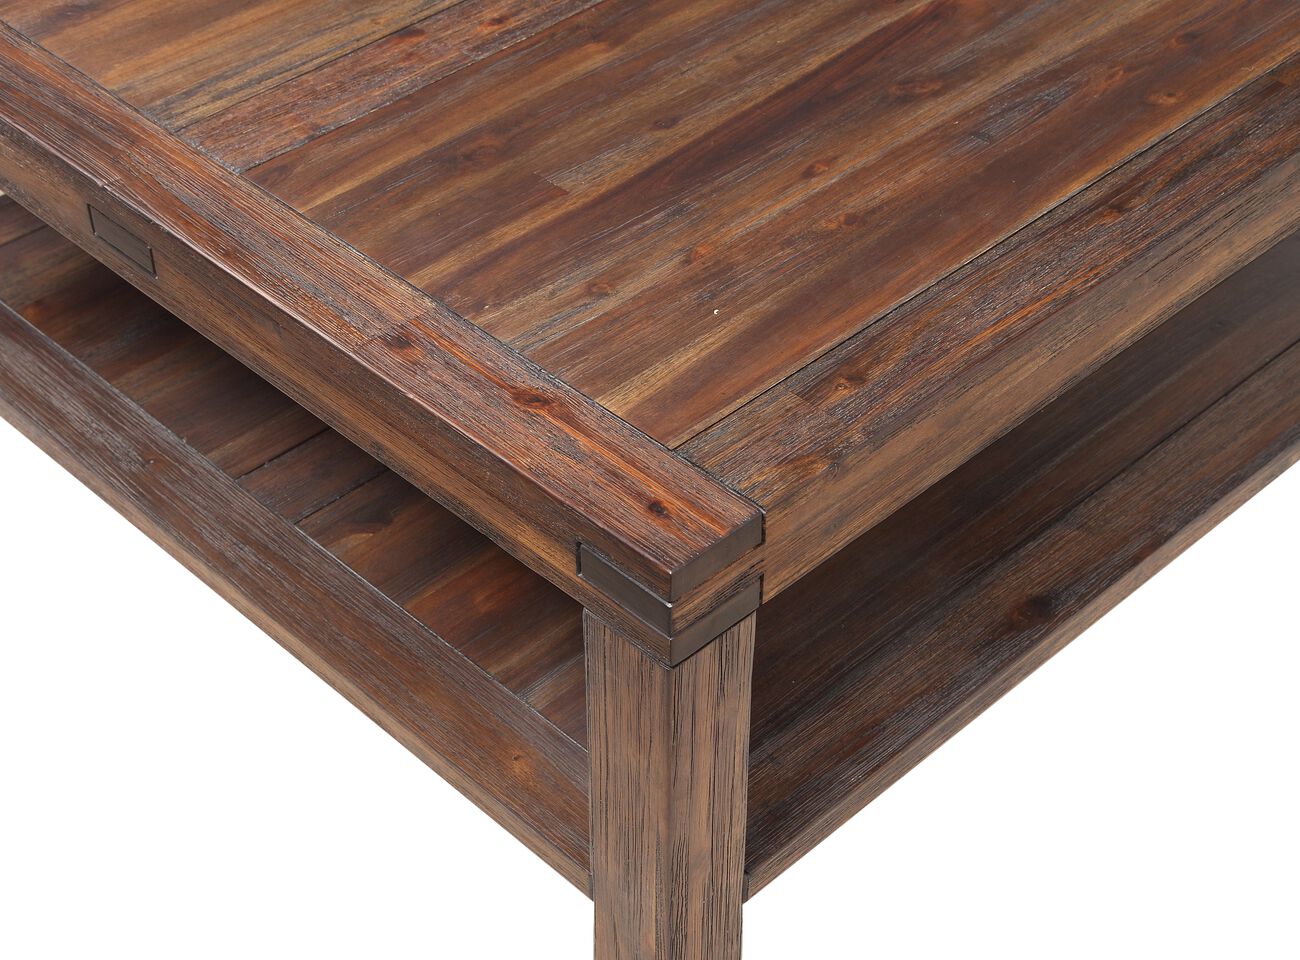 Acacia Wood Coffee Table with Exposed Mortise and Tenon Corner Joints, Brown